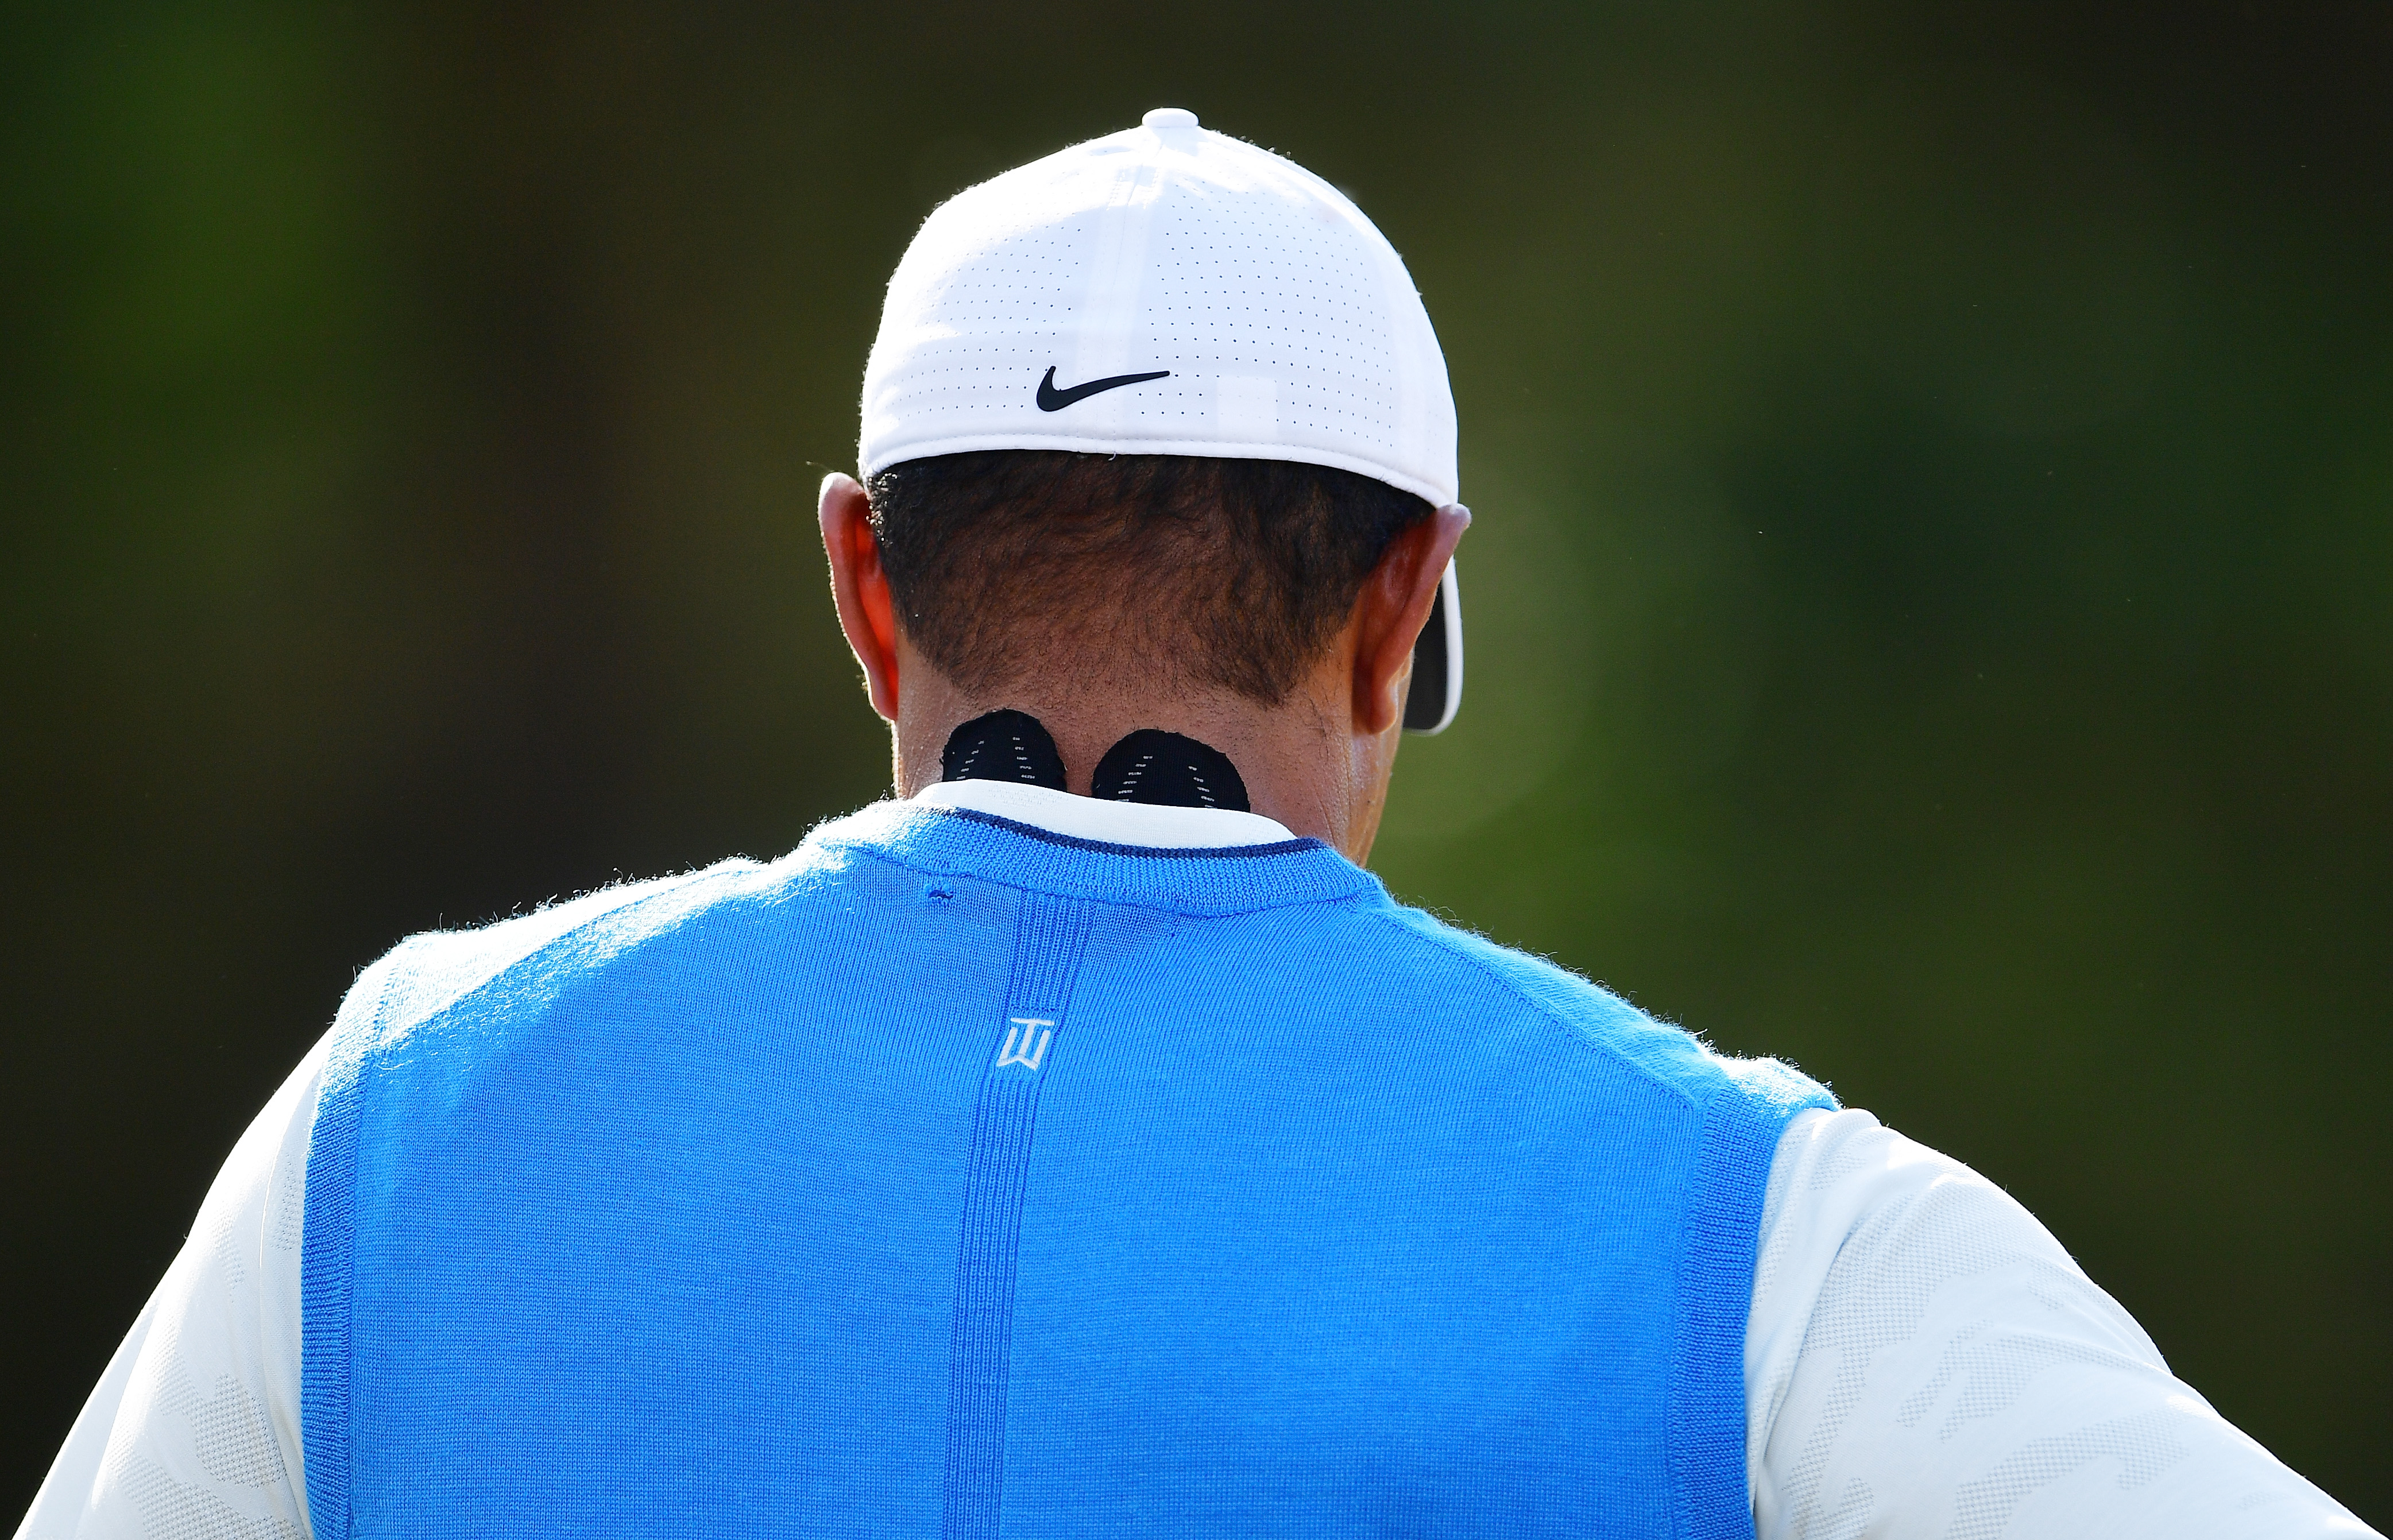 Here's the real reason Tiger Woods has tape on his neck at The Open